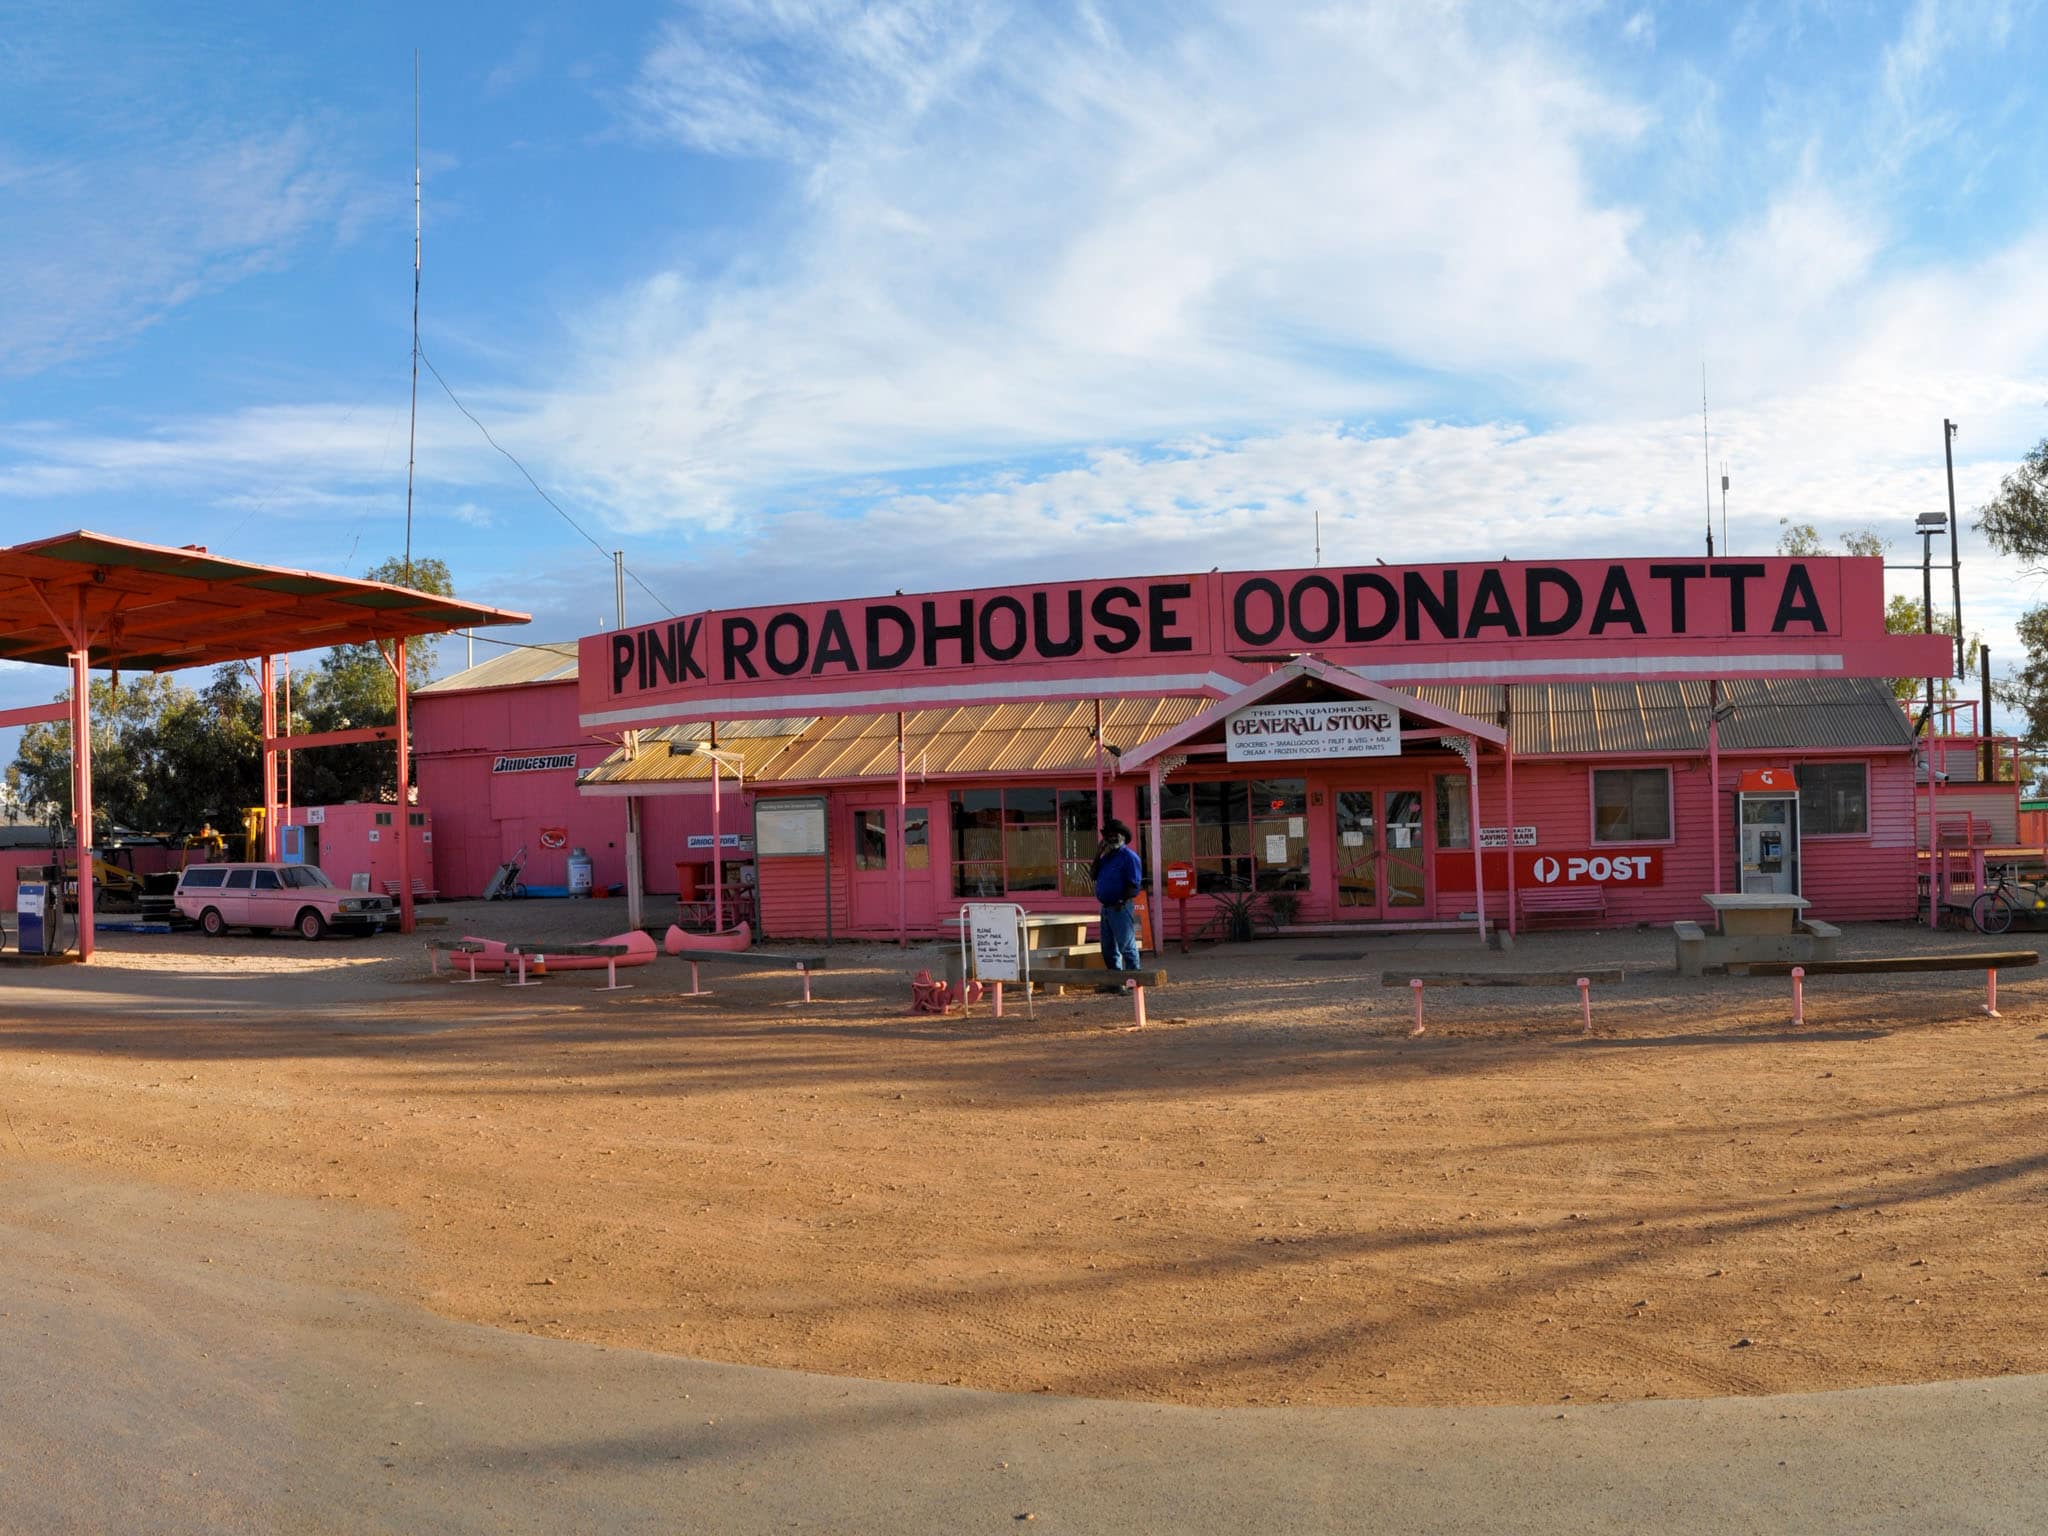 The Pink Roadhouse Oodnadatta